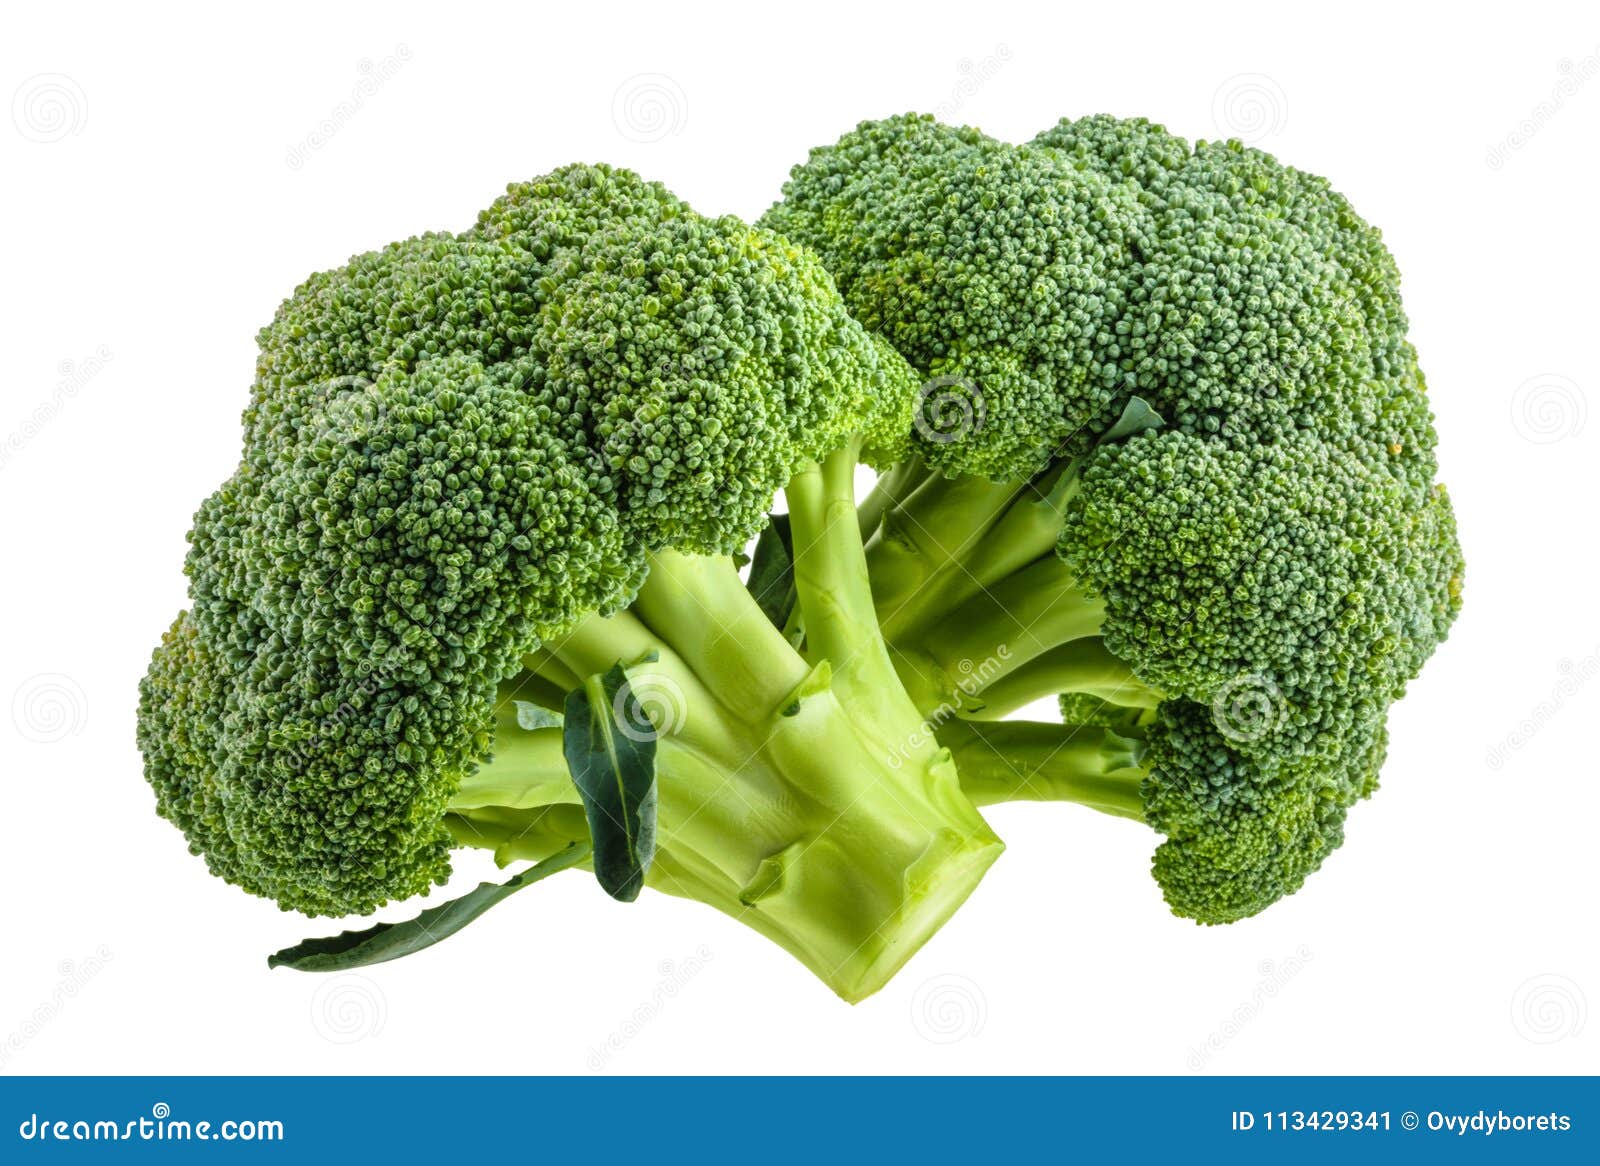 broccoli  on white without shadow